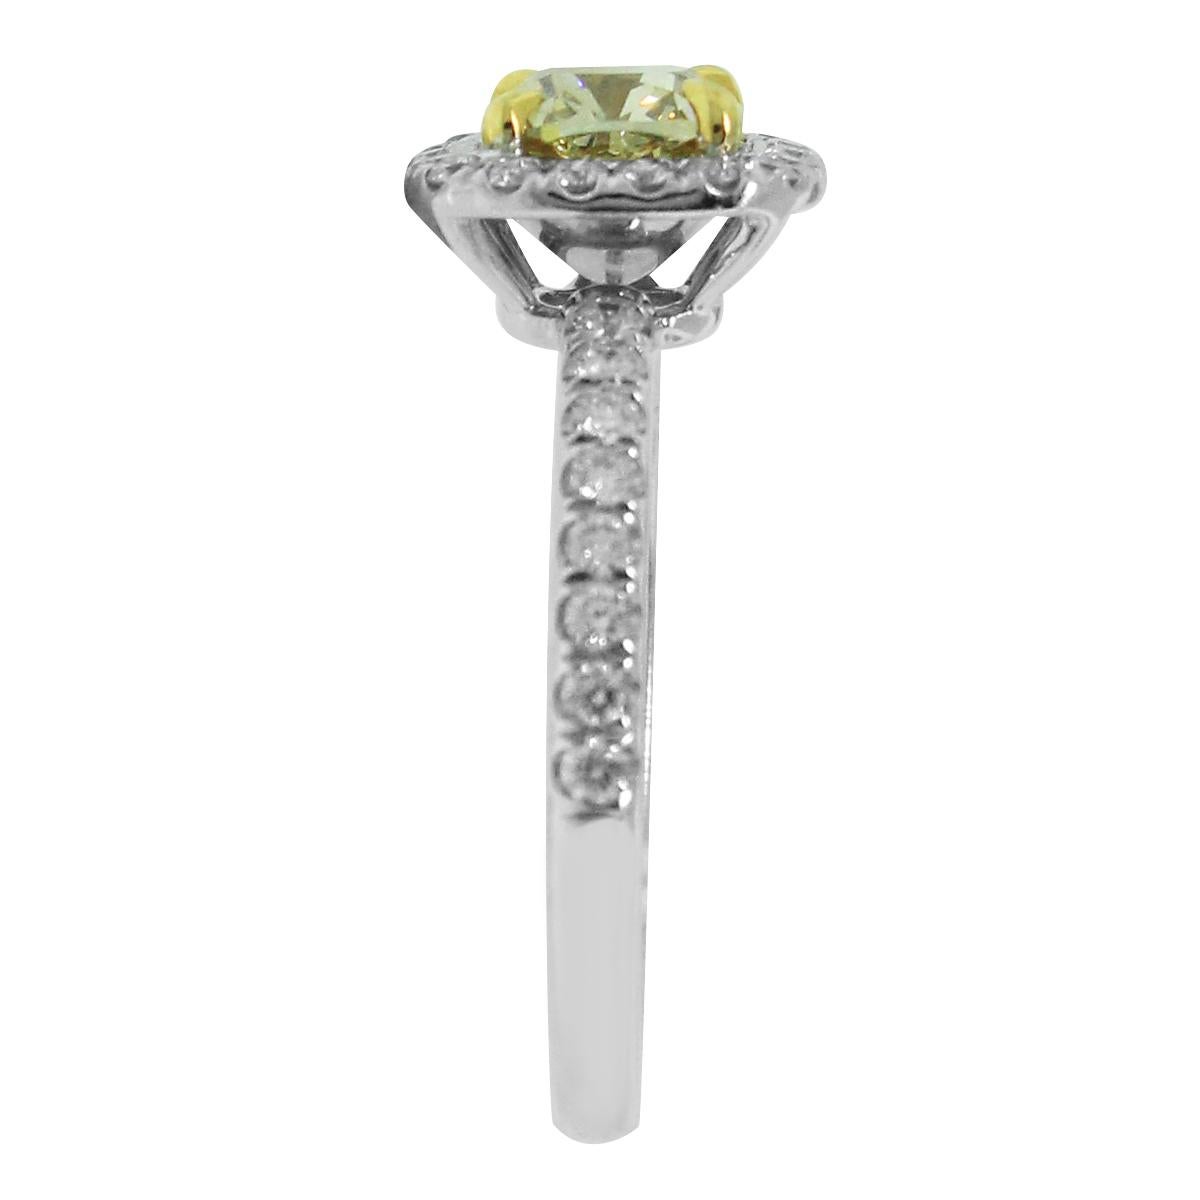 Material: 18k White Gold
Center Diamond Details: 1.23ct Cushion cut diamond. Center diamond is Fancy yellow/brown/green in color and VS in clarity. GIA Certified (#2145329073)
Accent Diamond Details: Approximately 0.32ctw round brilliant diamonds.